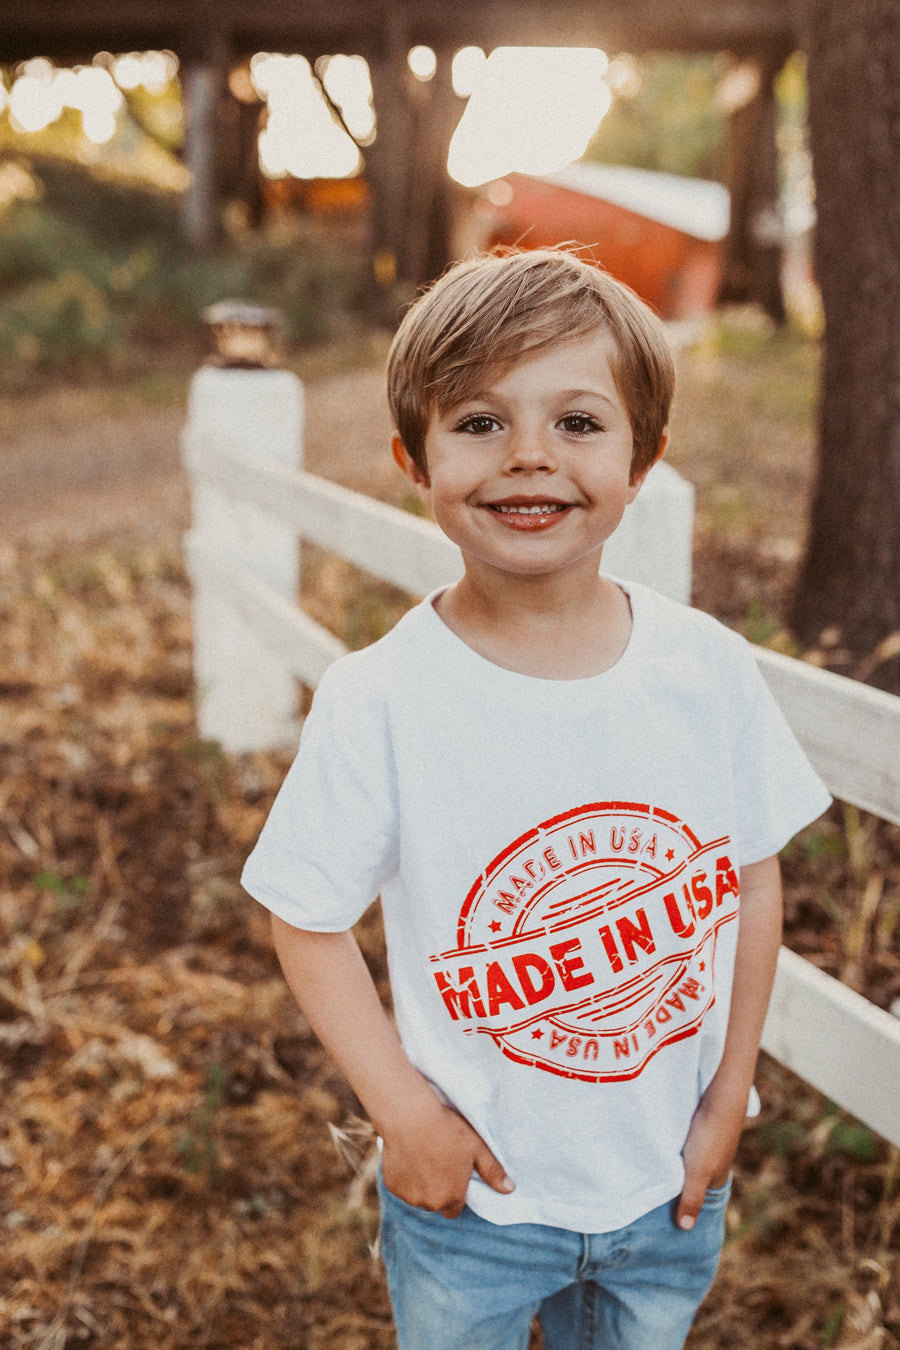 Made in USA Kid T-shirt, Adorable Patriotic Tee for the American Kid, 4th of July, Holiday T-shirt